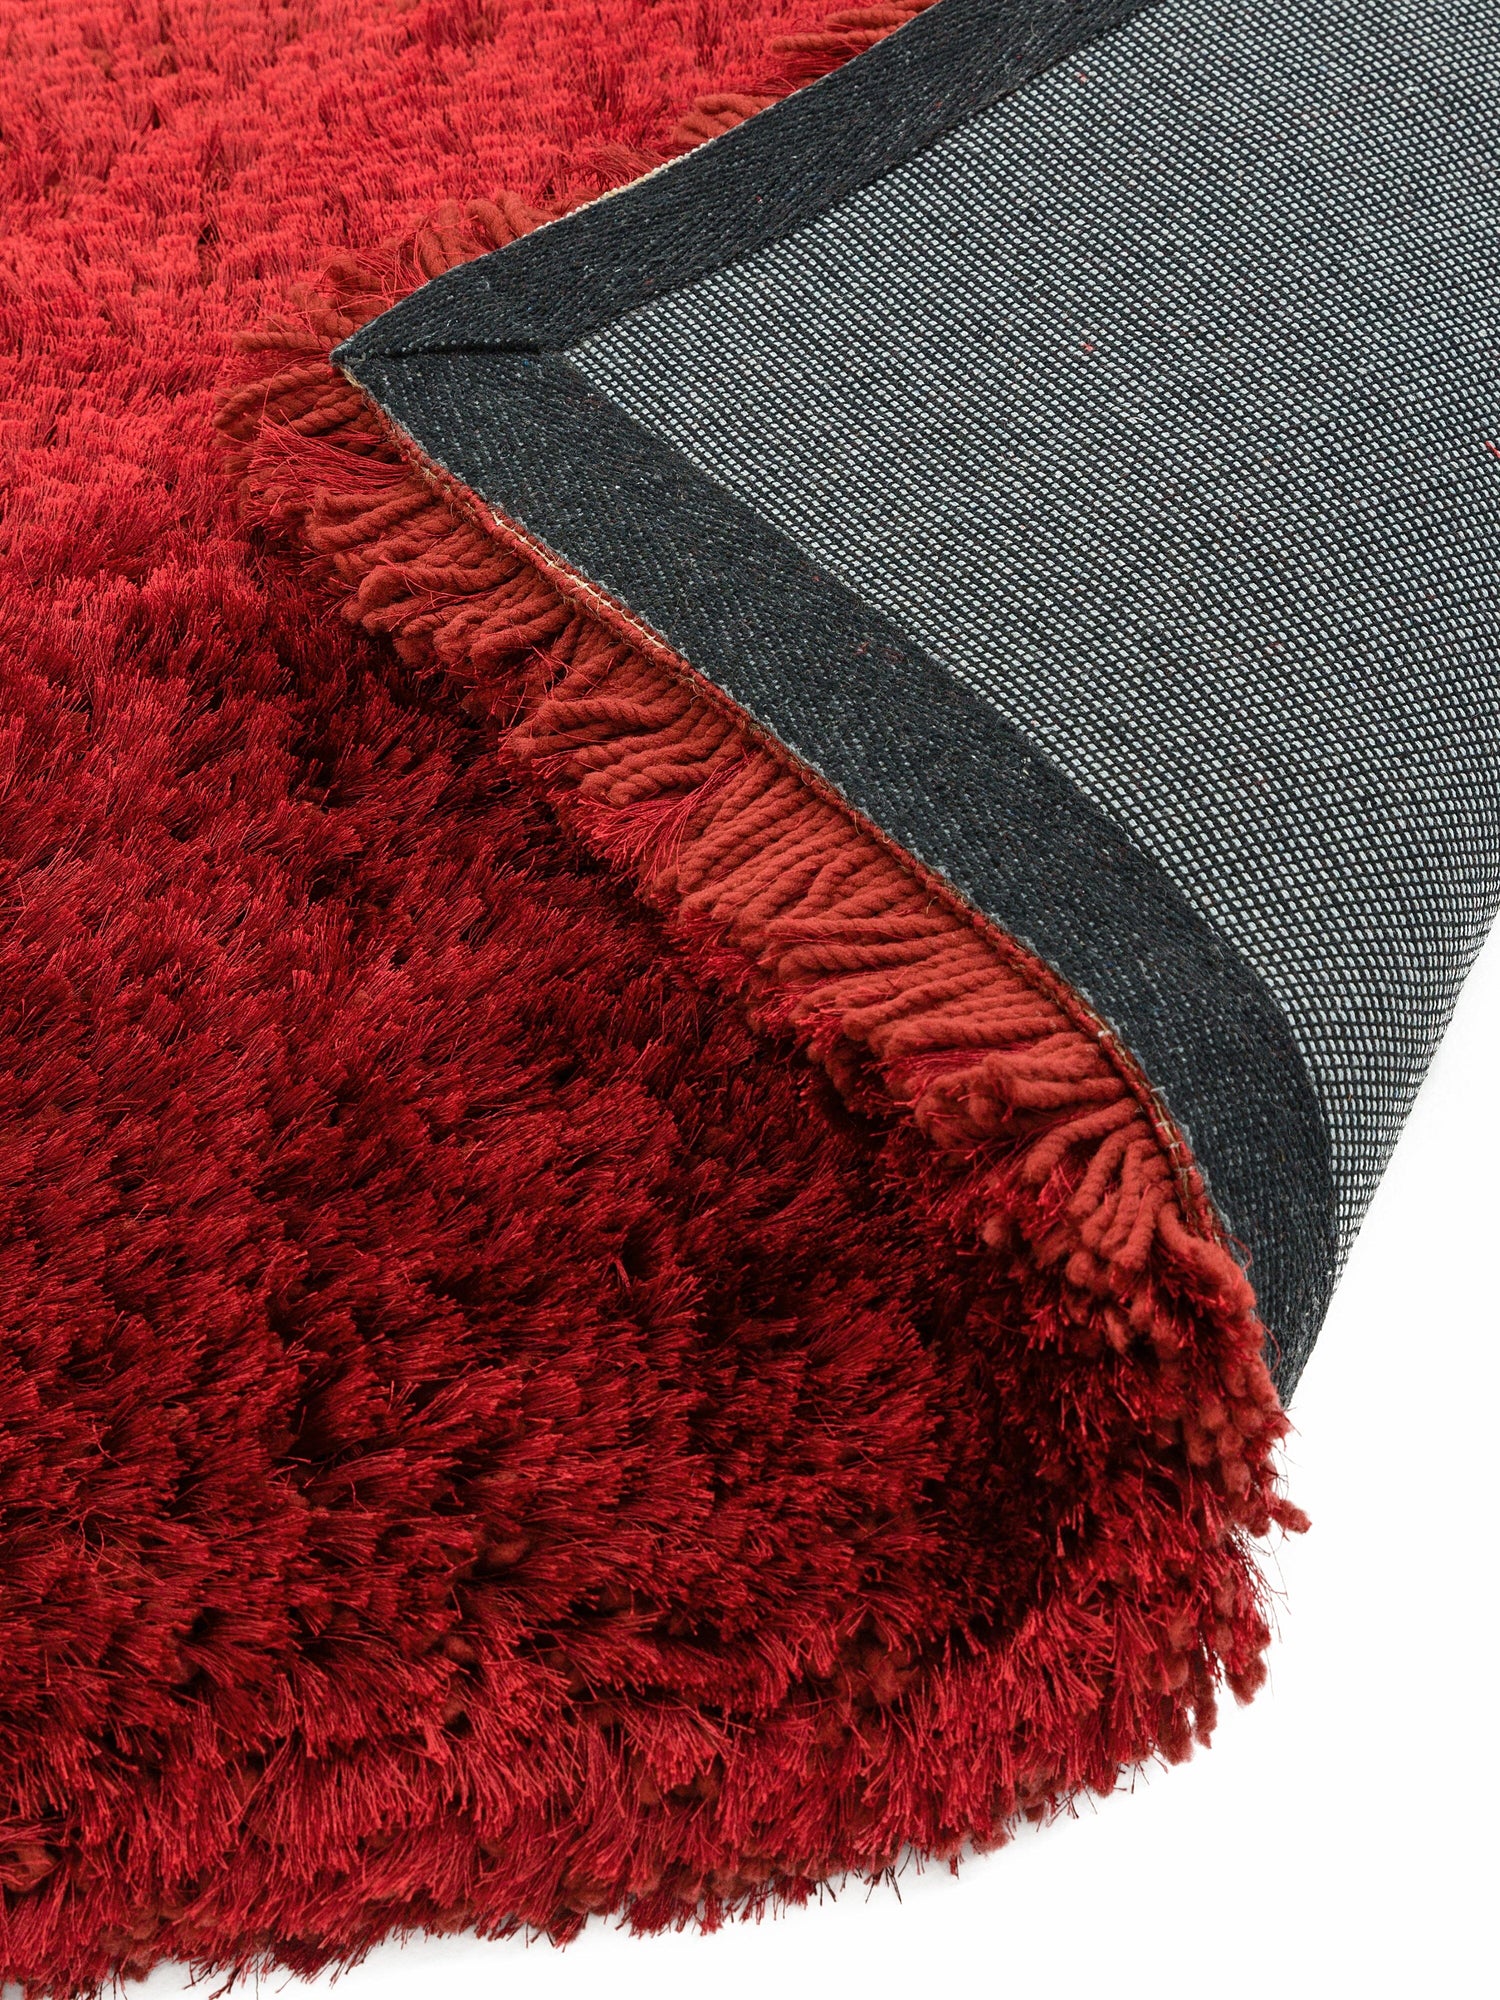  Asiatic Carpets-Asiatic Carpets Plush Hand Woven Rug Red - 160 x 230cm-Red 781 